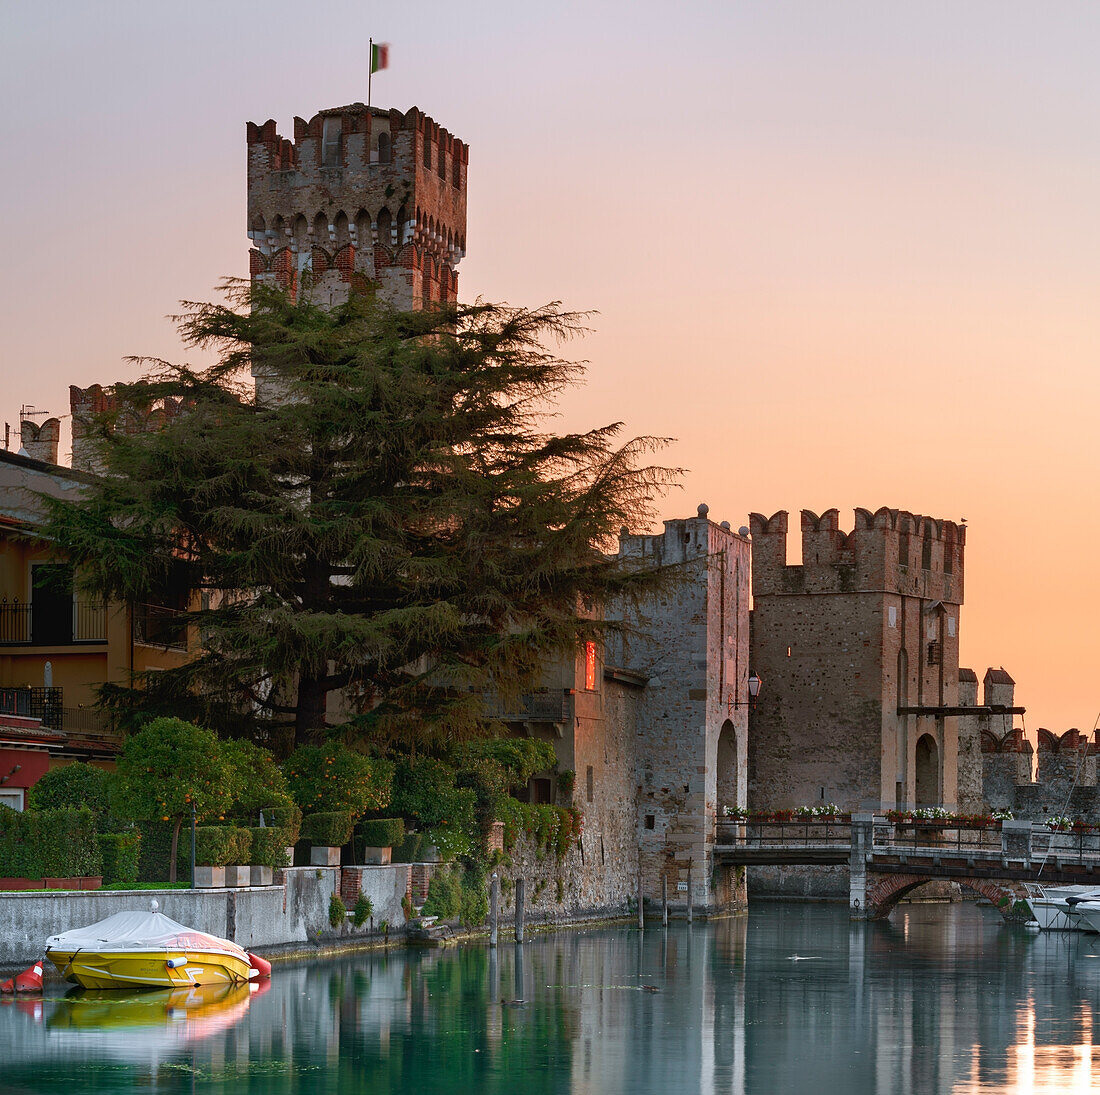 Scaliger Castle of Sirmione, entrance at sunrise; Sirmione, Lake of Garda, Brescia province, Lombardy, Italy, Europe